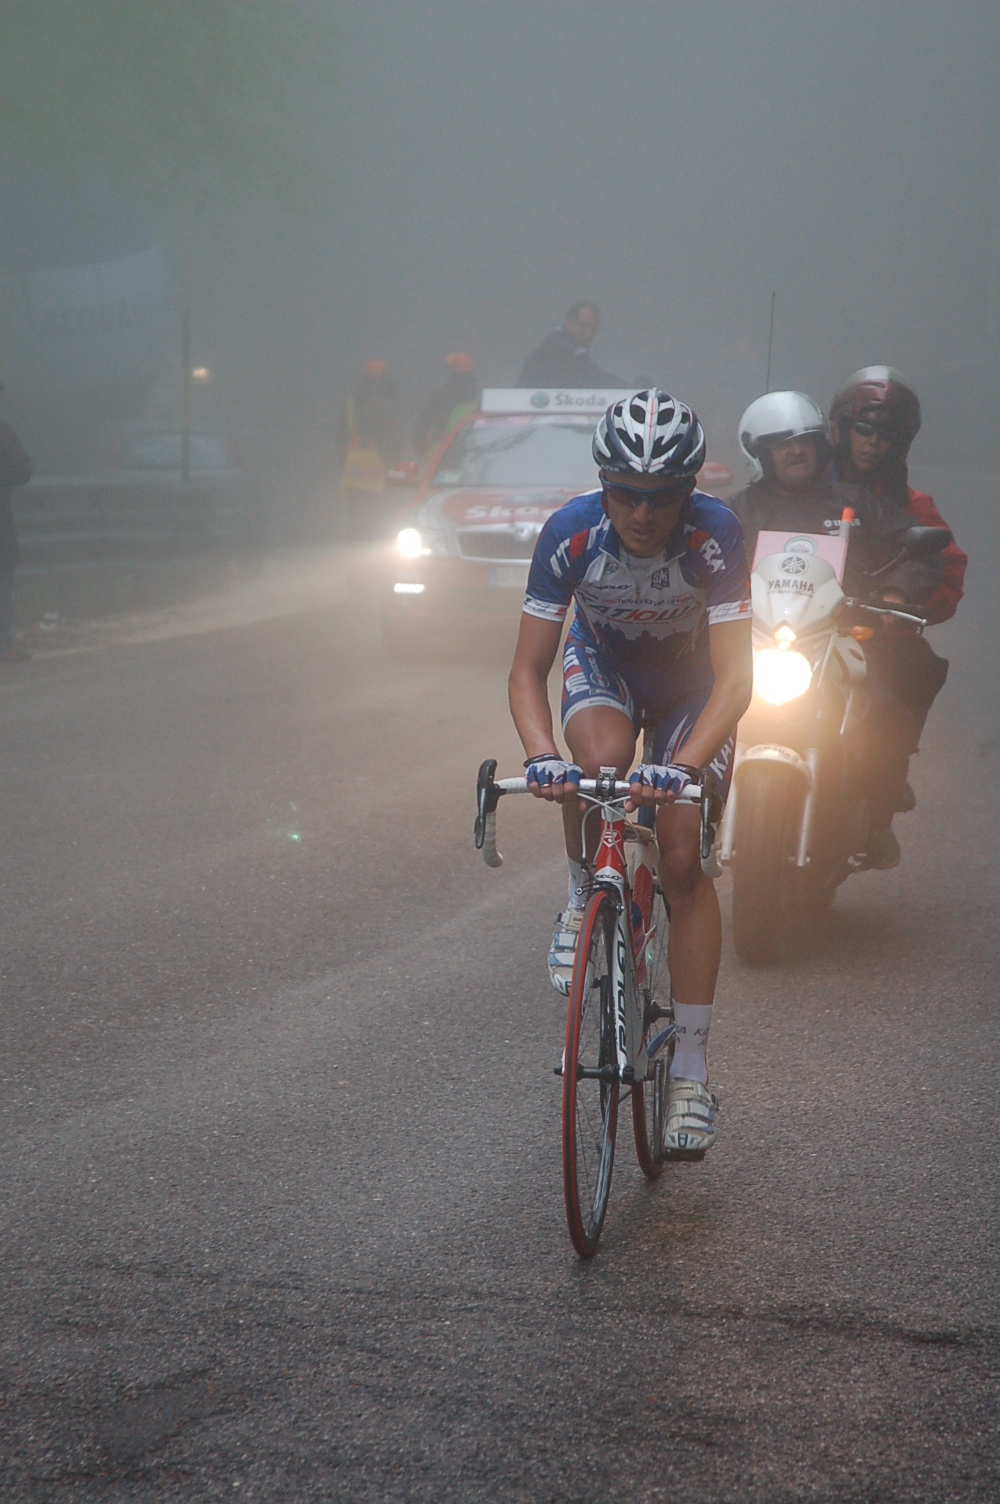 Riders in the Mist